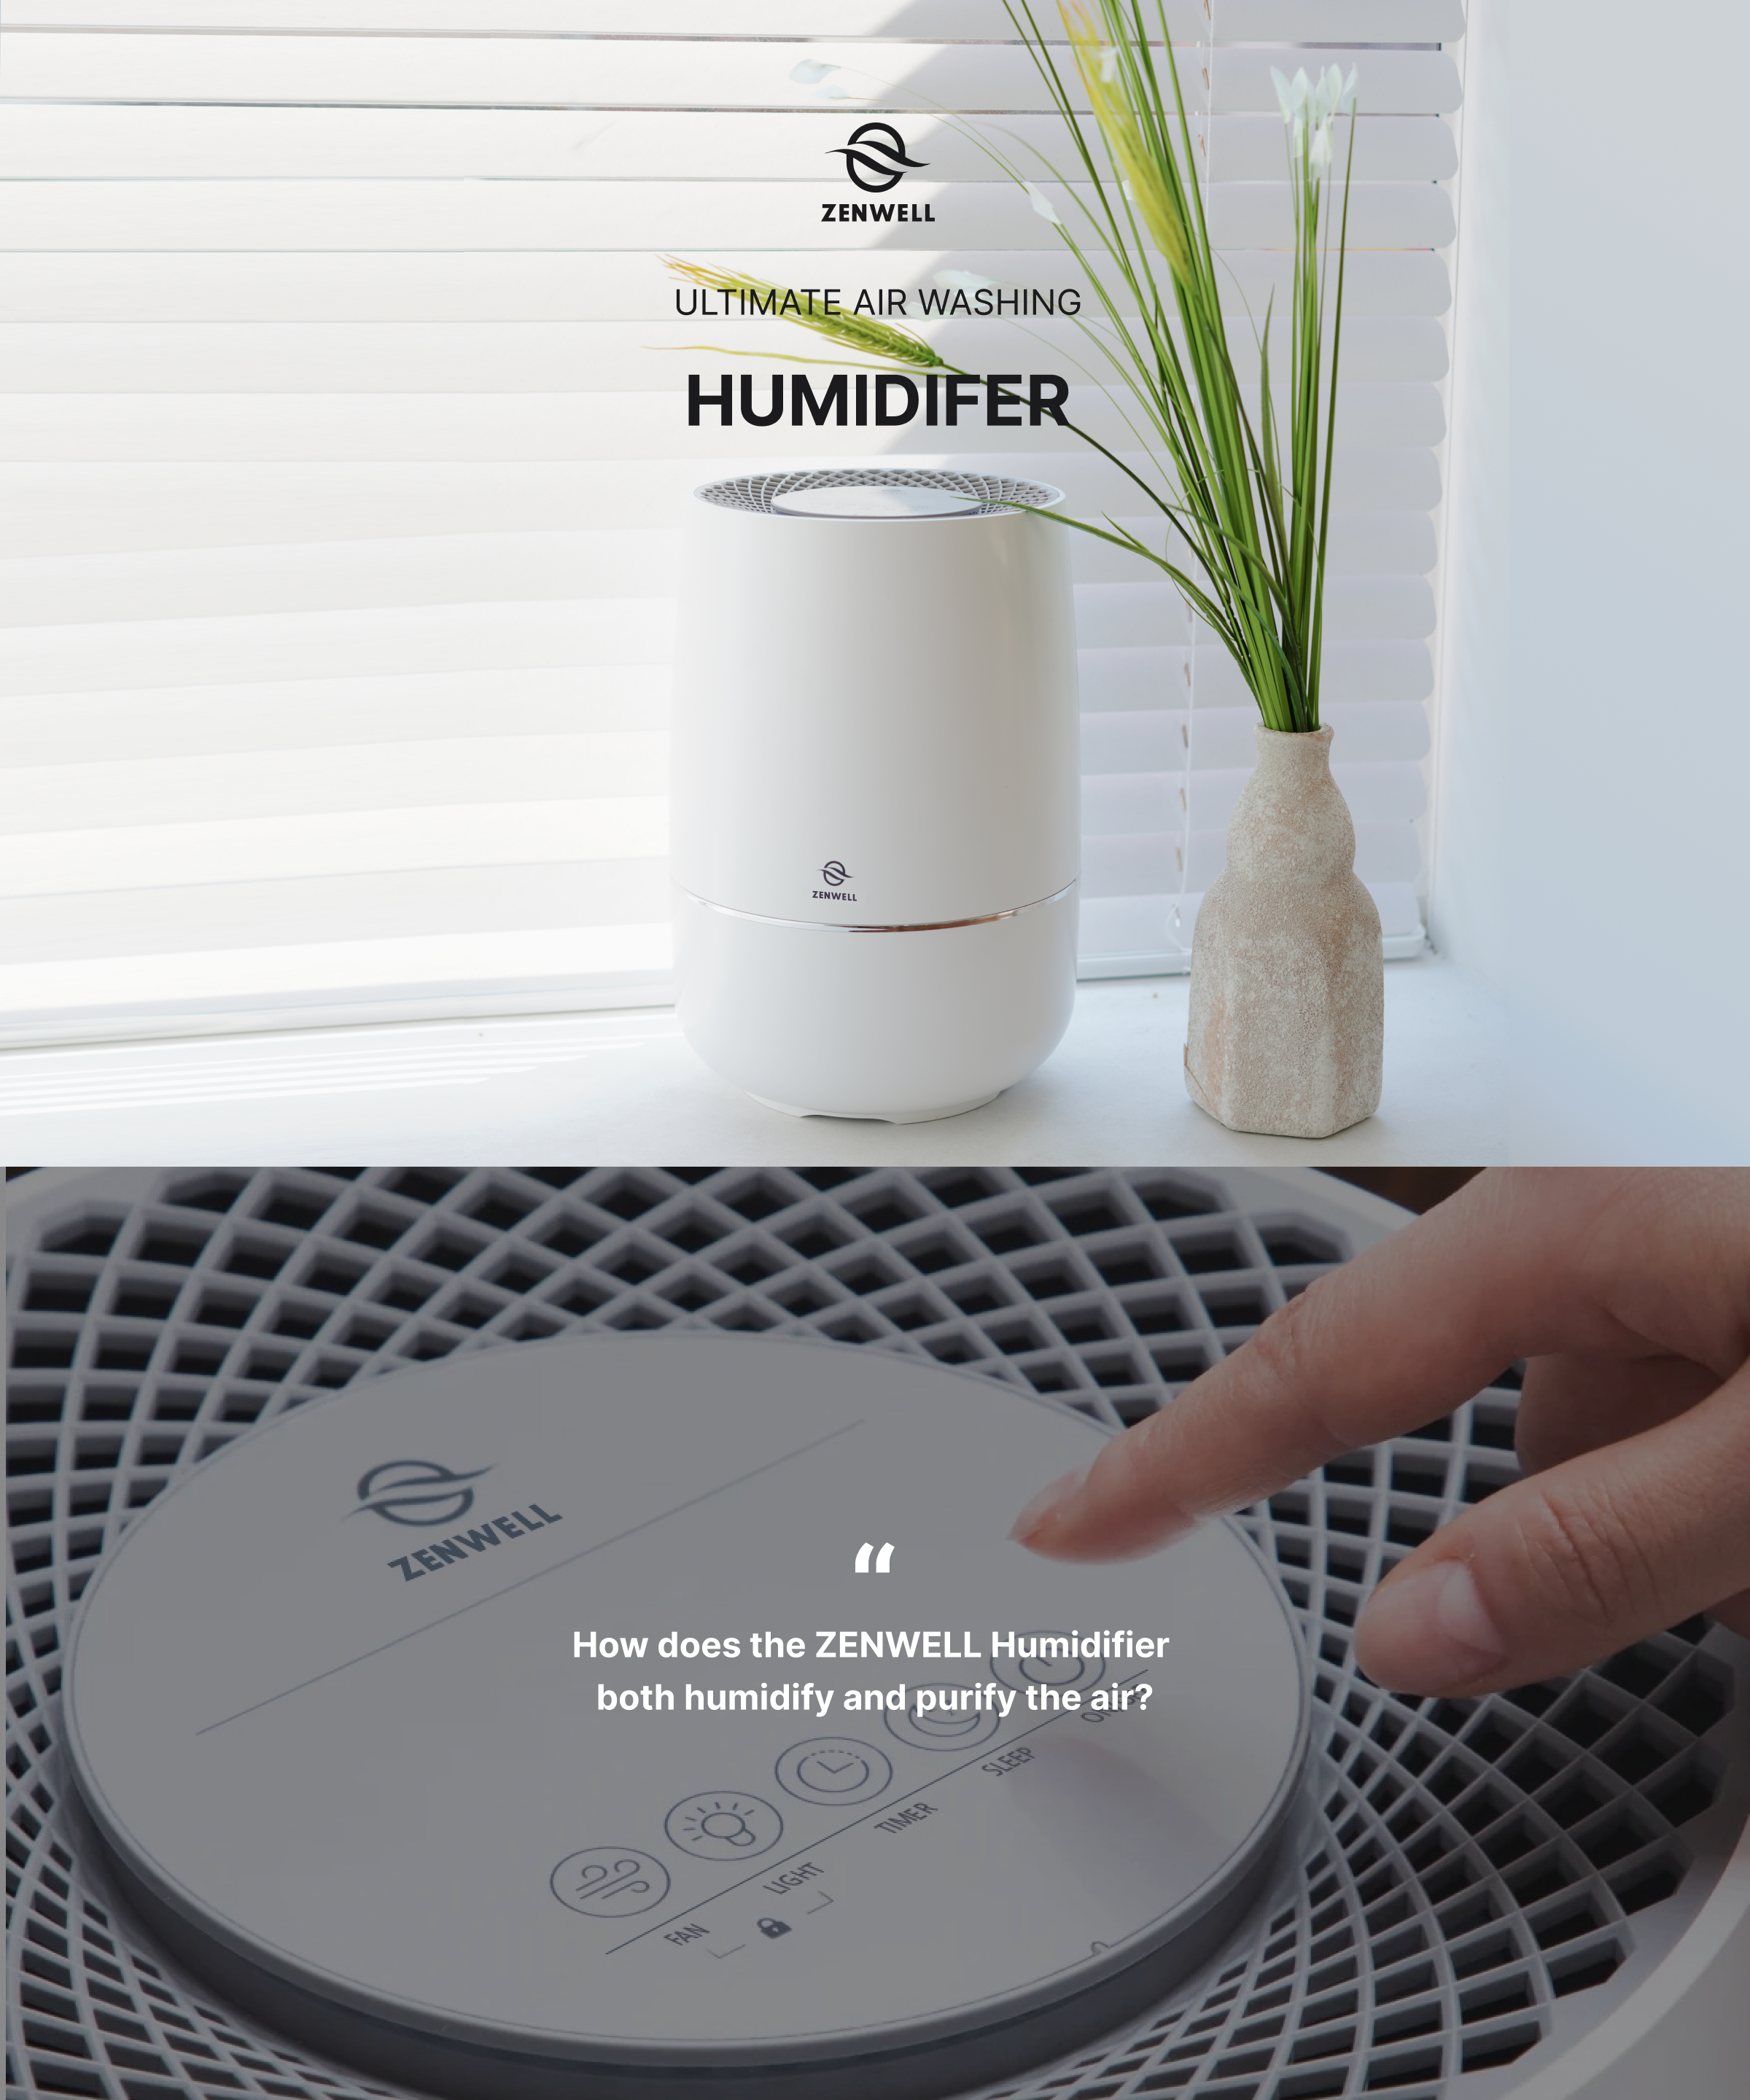 Humidifier product description image with quoted question asking how this ultimate air washer both humidifies and purifies the air.